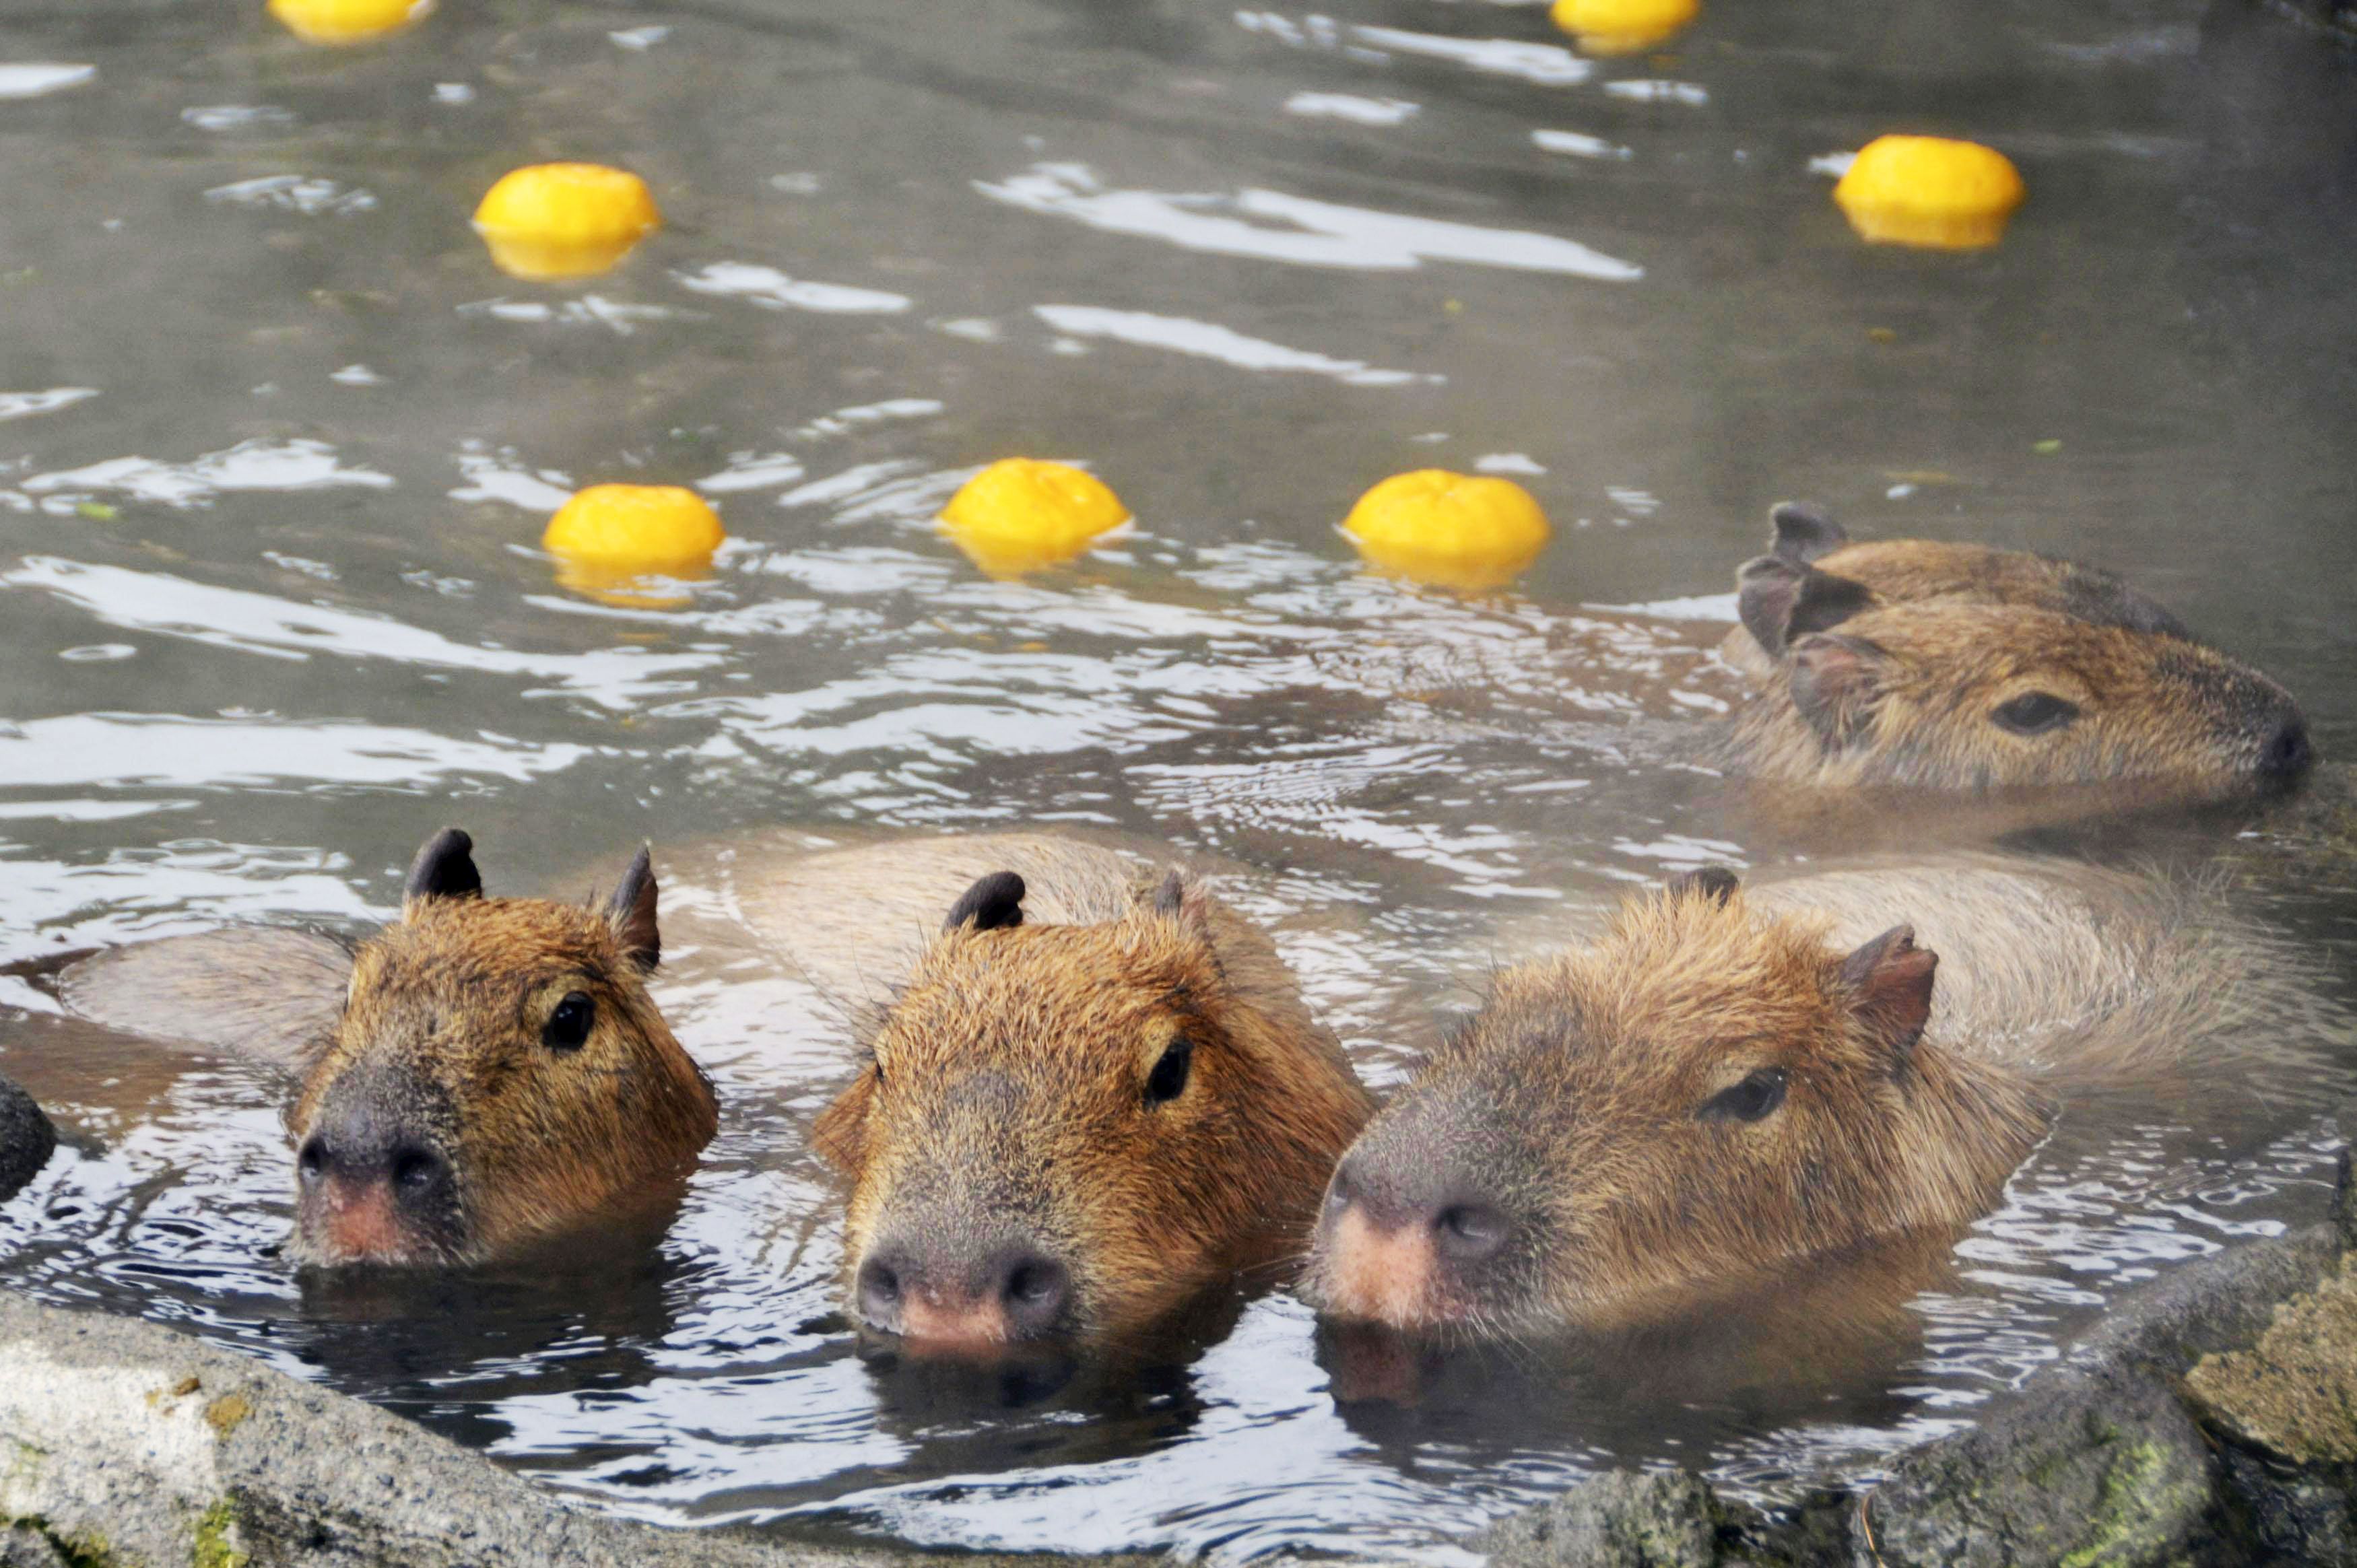 I Wish I Were as Chill as These Capybaras